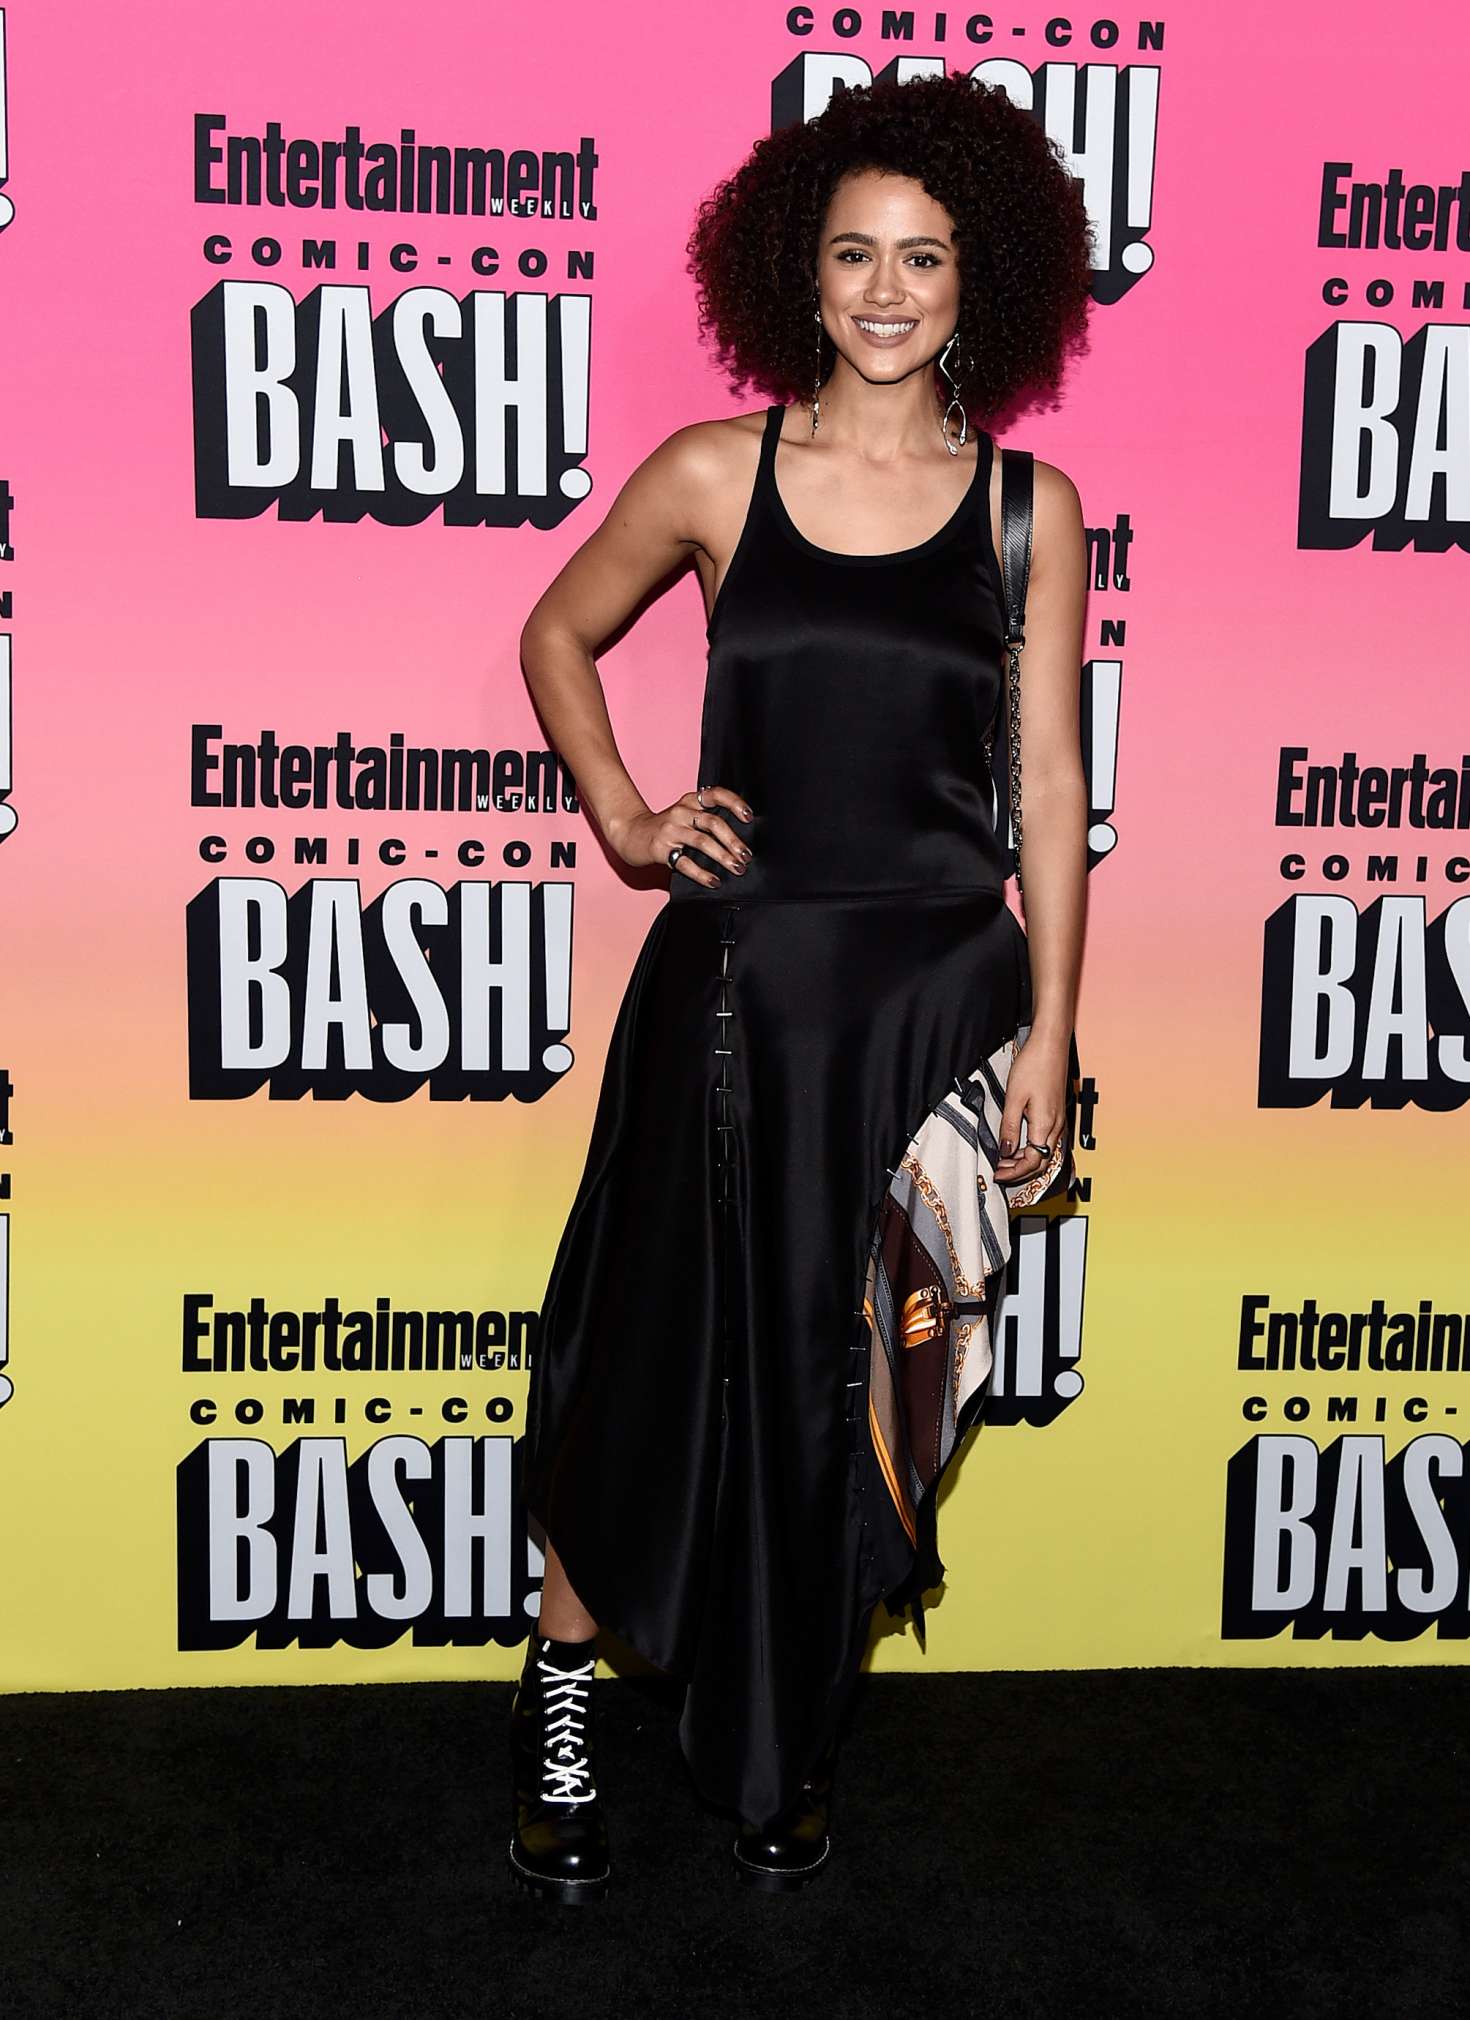 Nathalie Emmanuel â€“ Entertainment Weekly Annual Comic-Con Party 2016 in San Diego